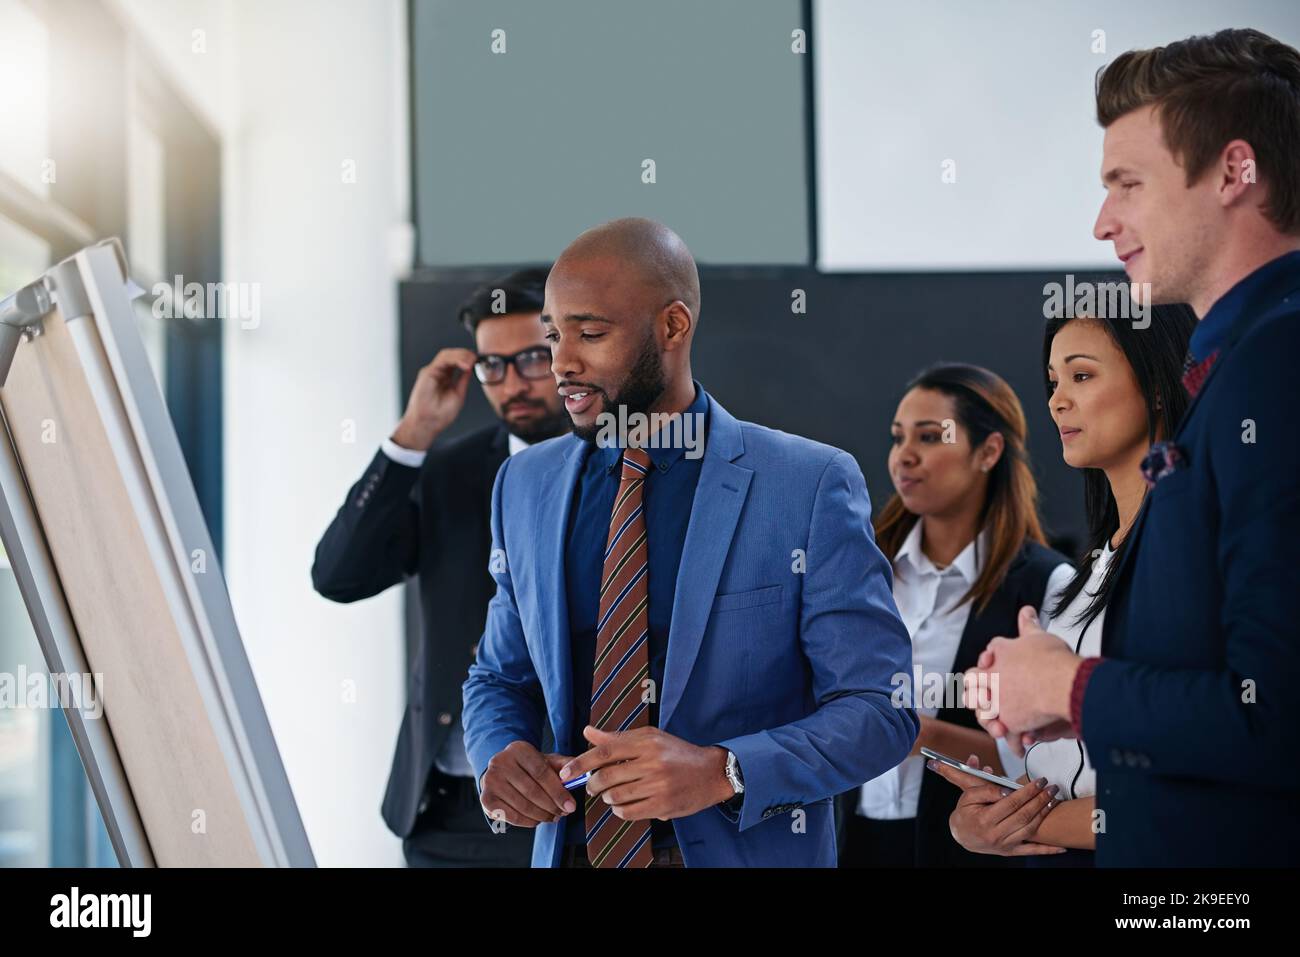 Hes pitch is impressing everyone. a young businessman giving a demonstration on a white board to his colleagues in a modern office. Stock Photo